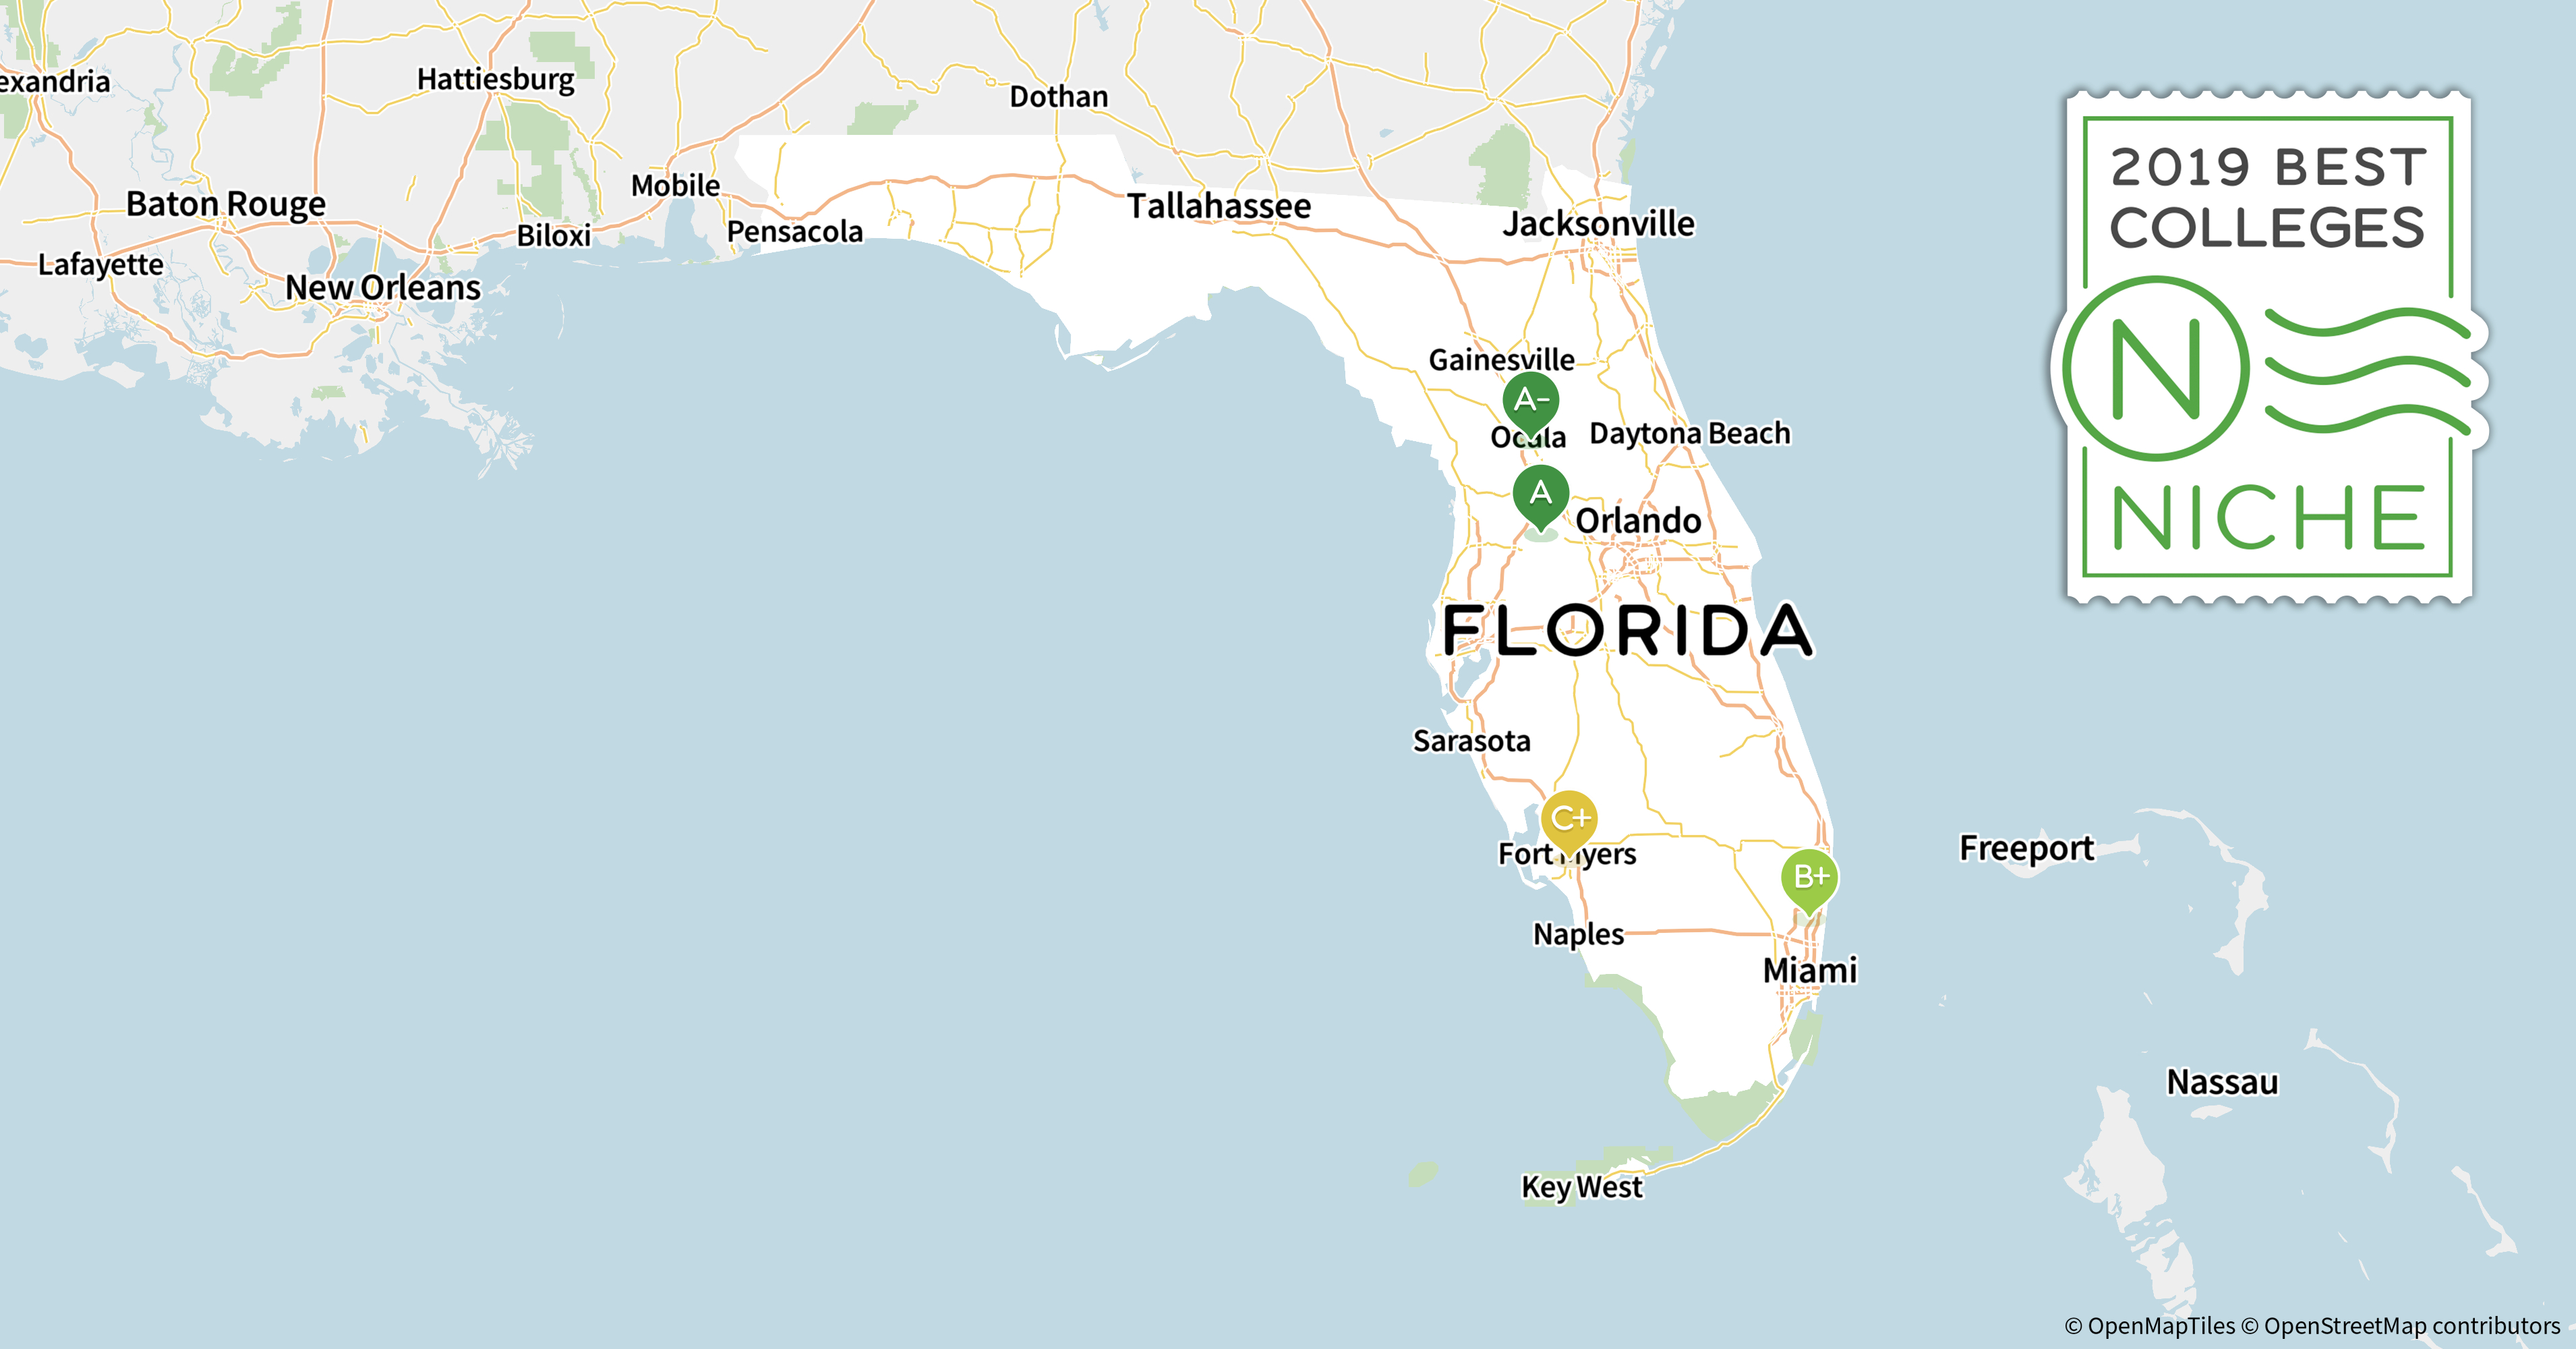 2019 Best Colleges In Florida - Niche - Florida Tech Map